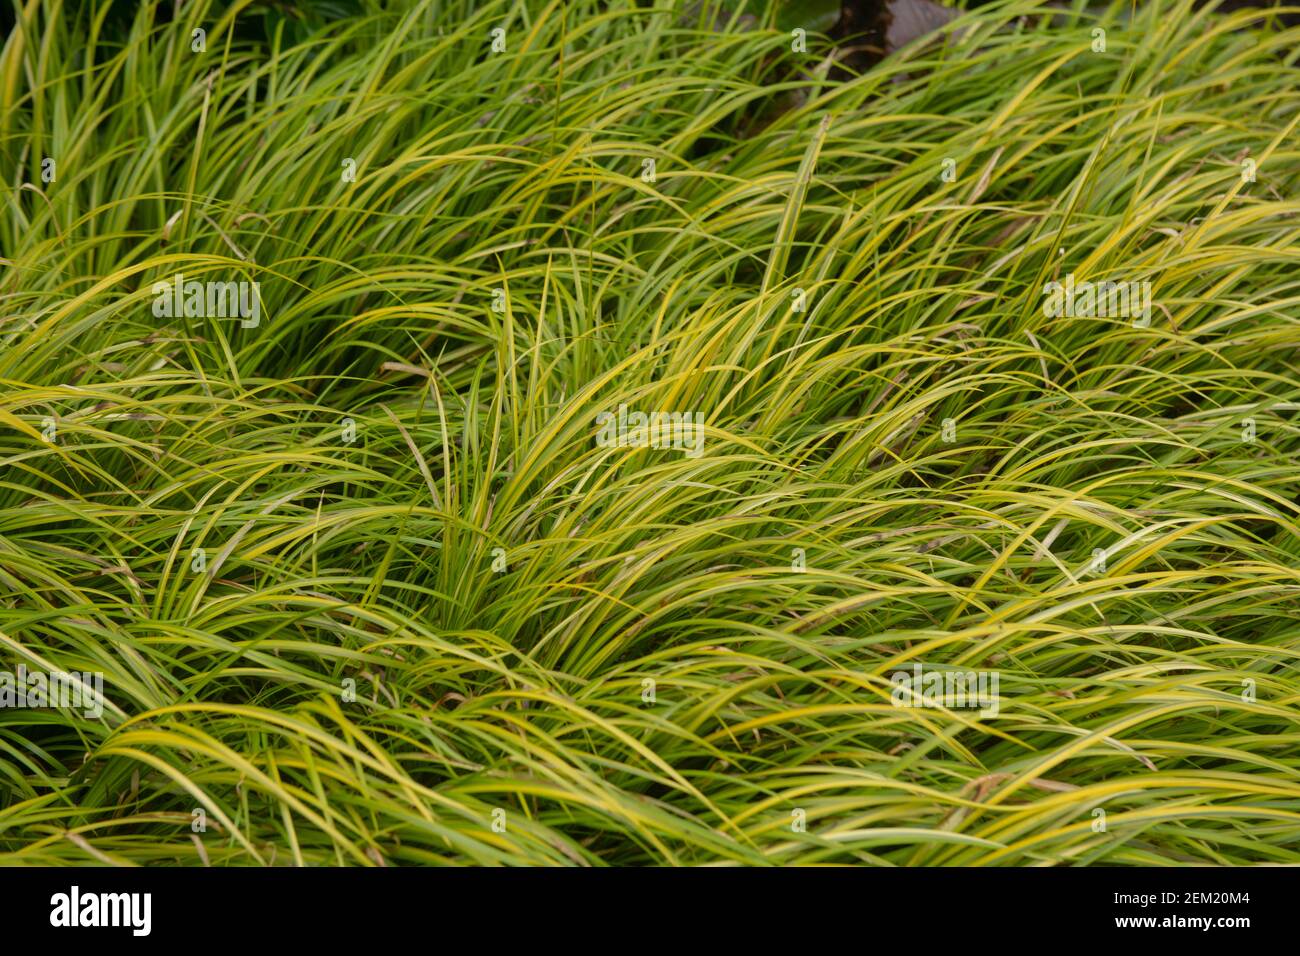 Winter Variegated Green and Yellow Foliage of the Grassy Leaved Sweet Flag Plant (Acorus gramineus 'Oborozuki') Growing in a Garden in Rural Devon, En Stock Photo